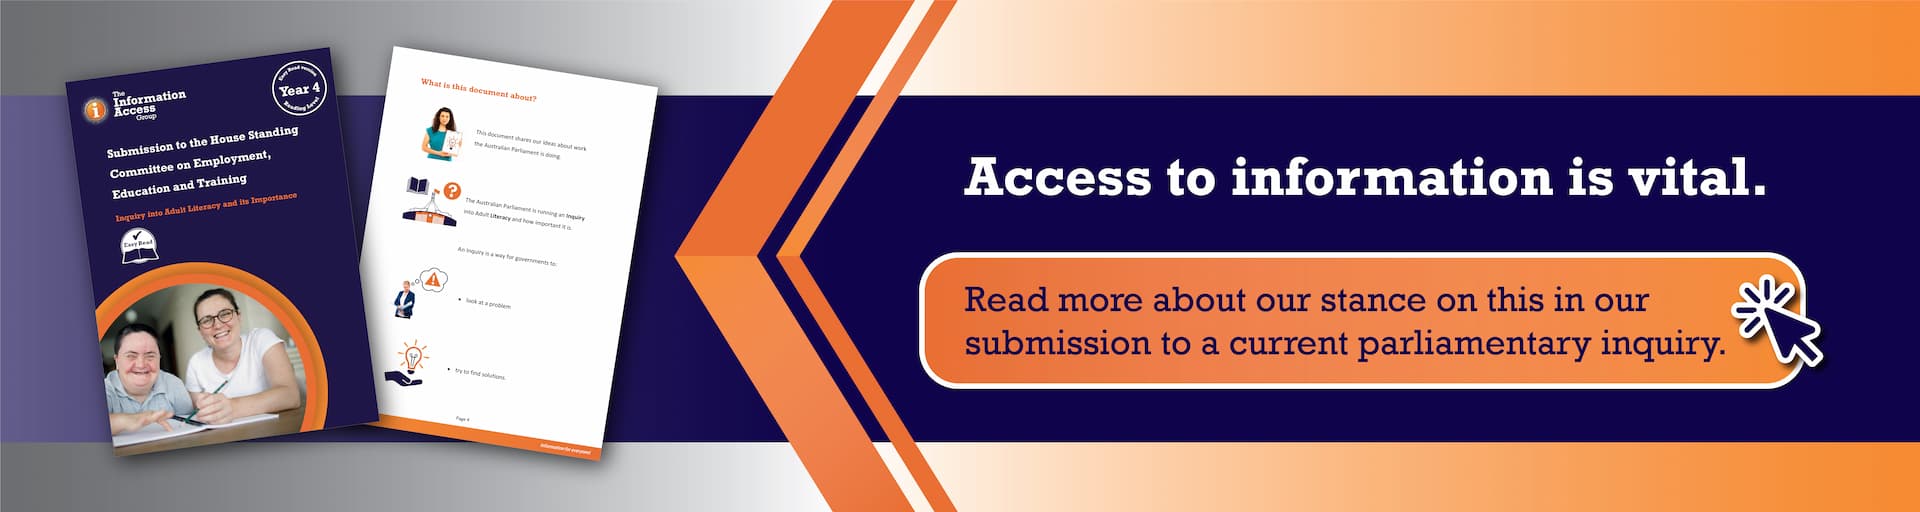 Access to information is vital. Read more about our stance on this in our submission to a current parliamentary inquiry.